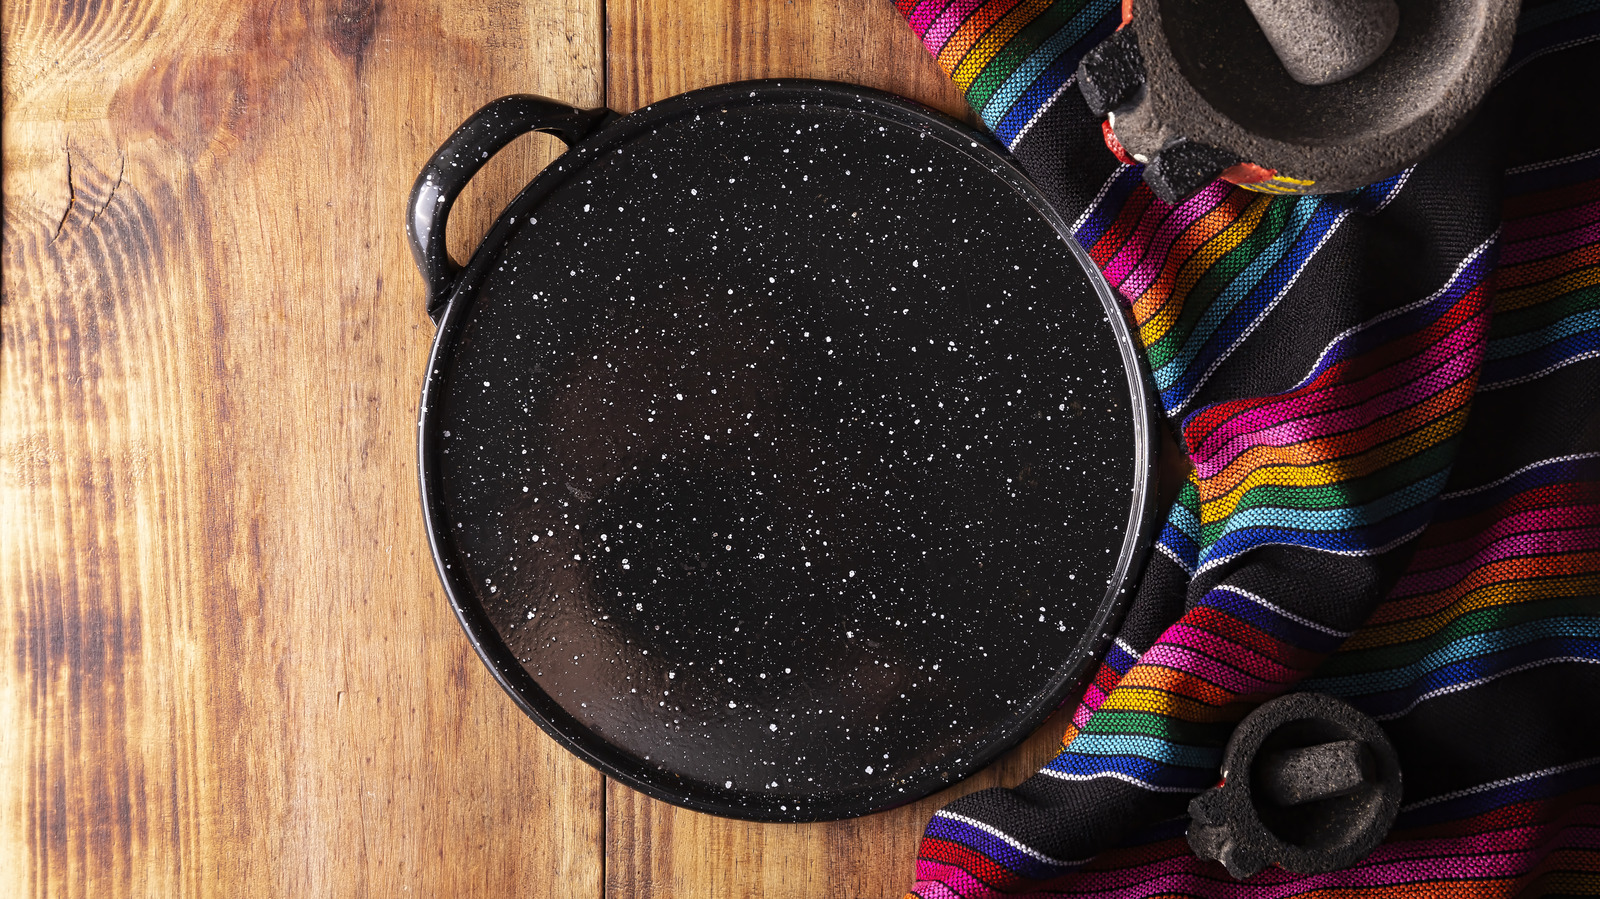 What Is A Comal And How Is It Used For Mexican Cuisine?